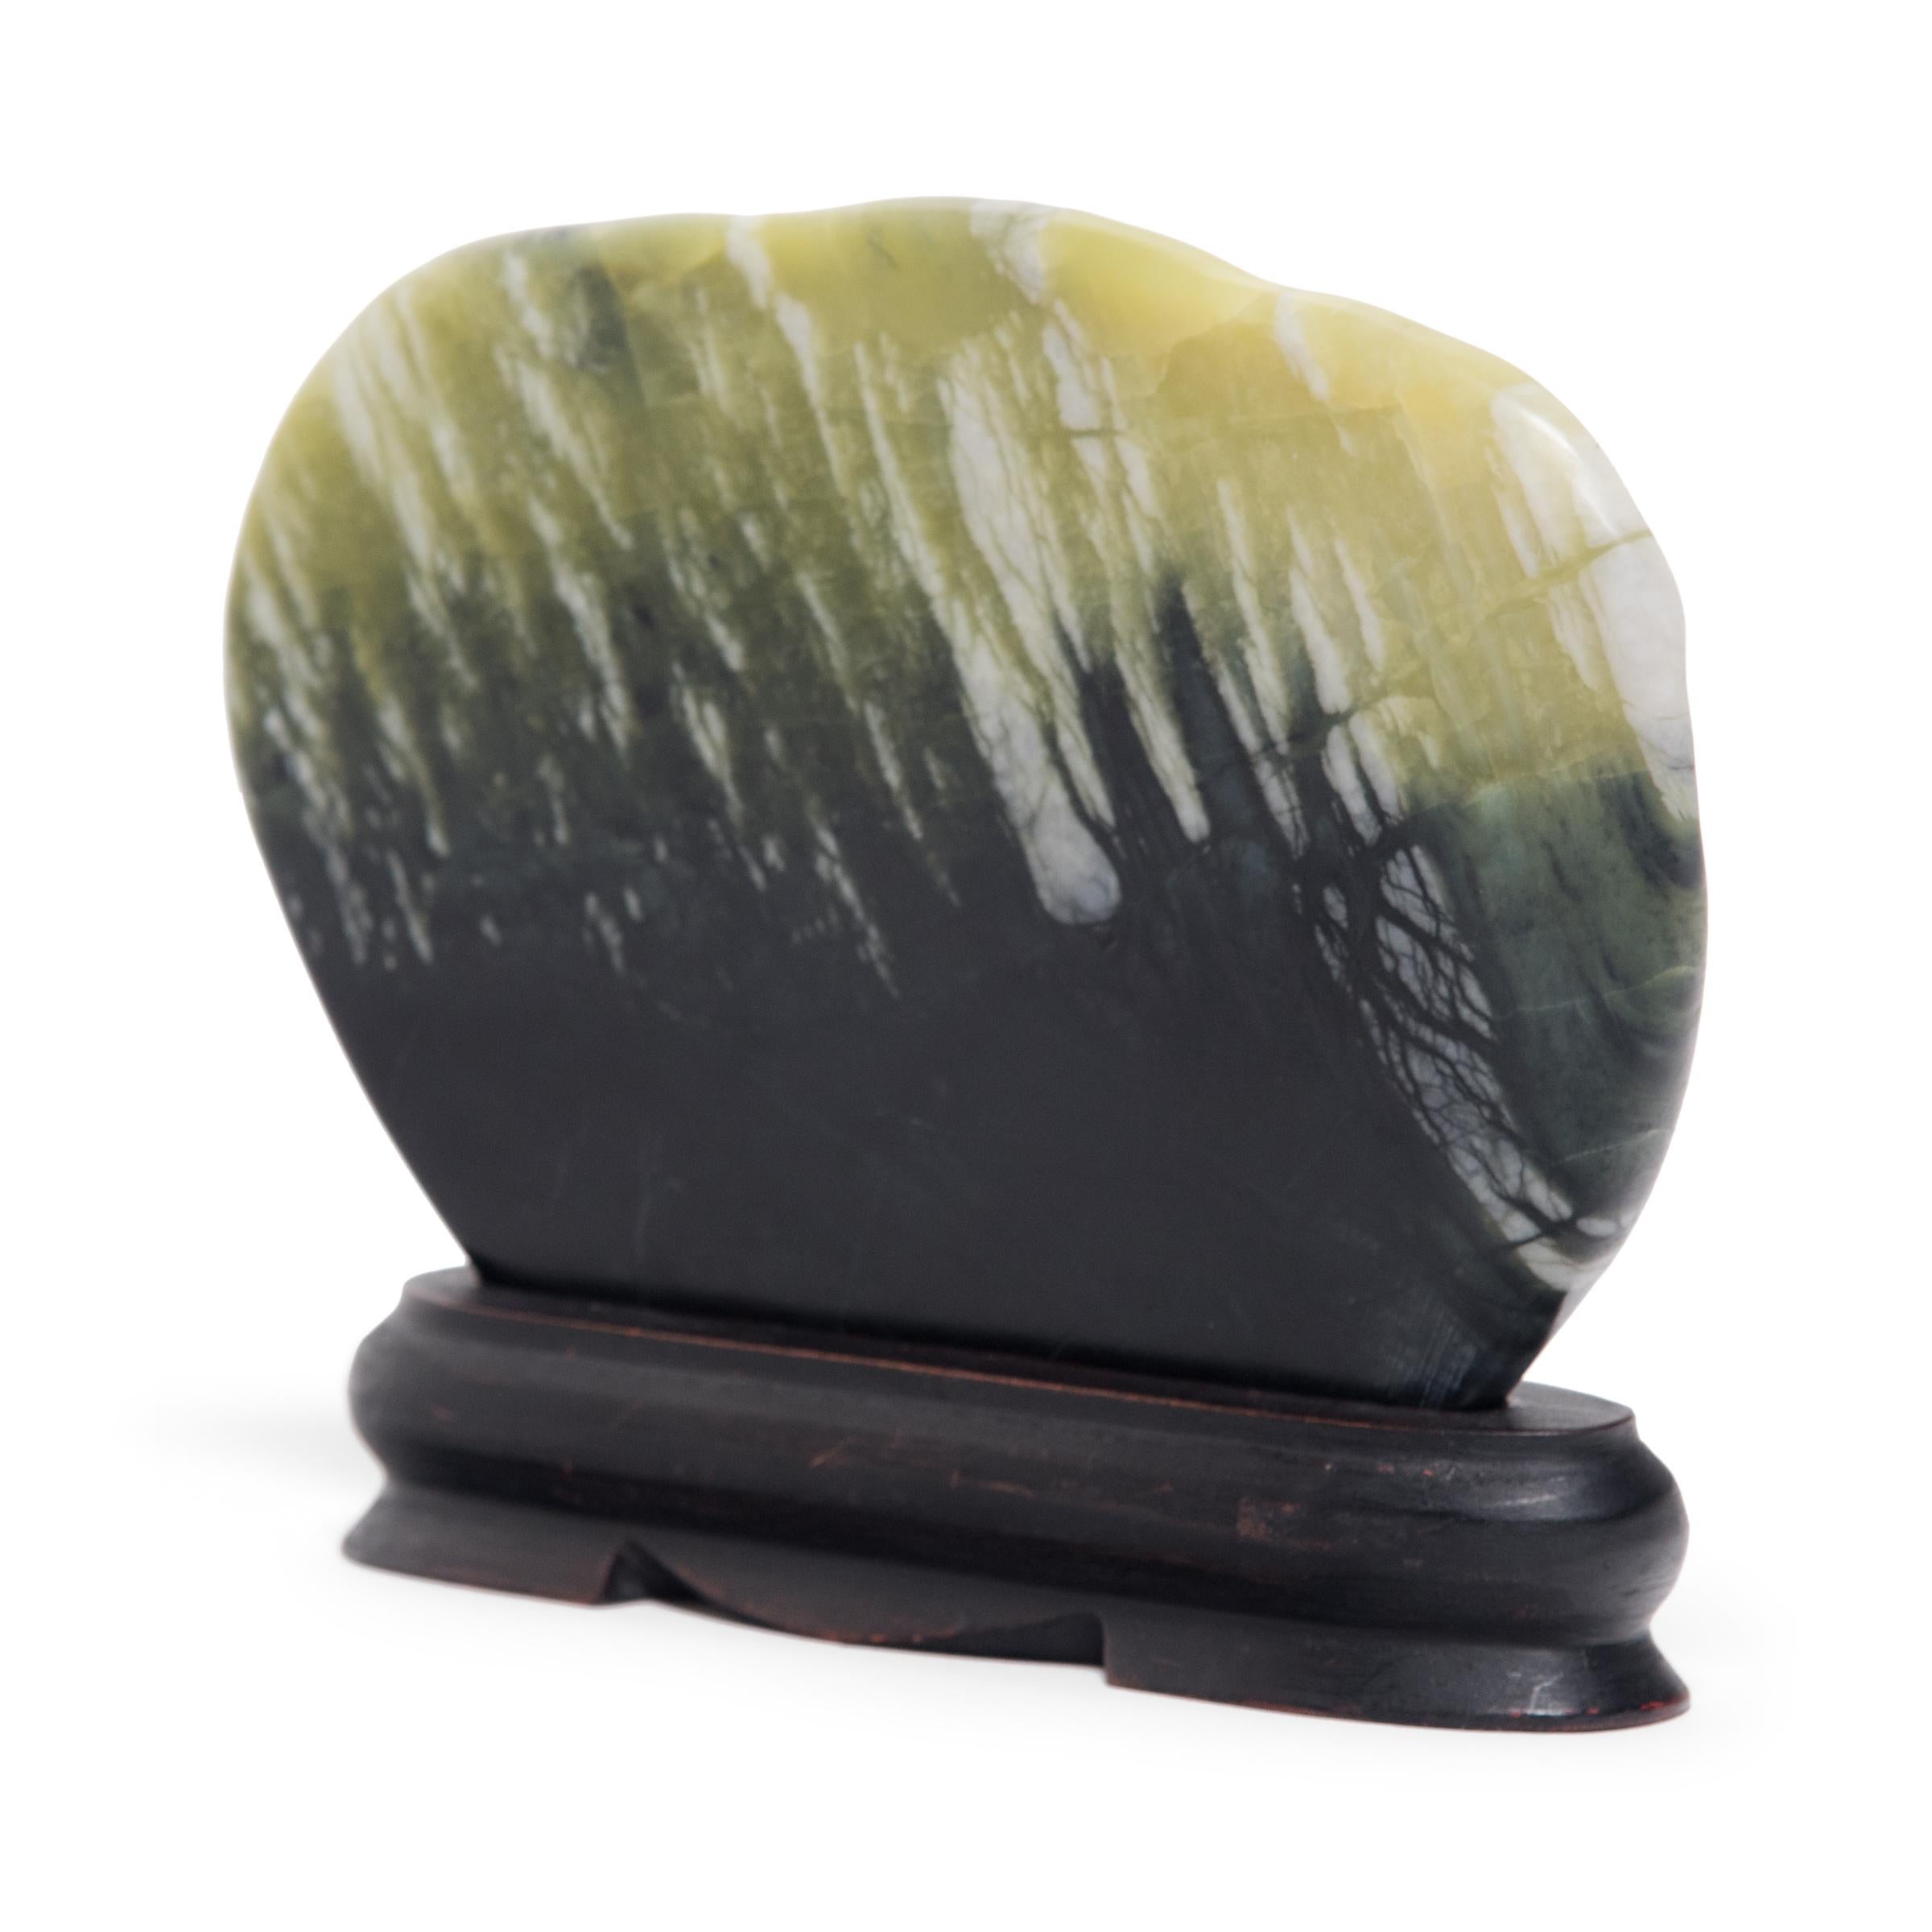 A well-chosen stone is a resting place for the mind, inspiring calm and contemplation. Marked by currents of jadeite, moss agate, and serpentine, this petite greenery stone evokes the grandeur of nature with a beautiful pattern of light to dark.